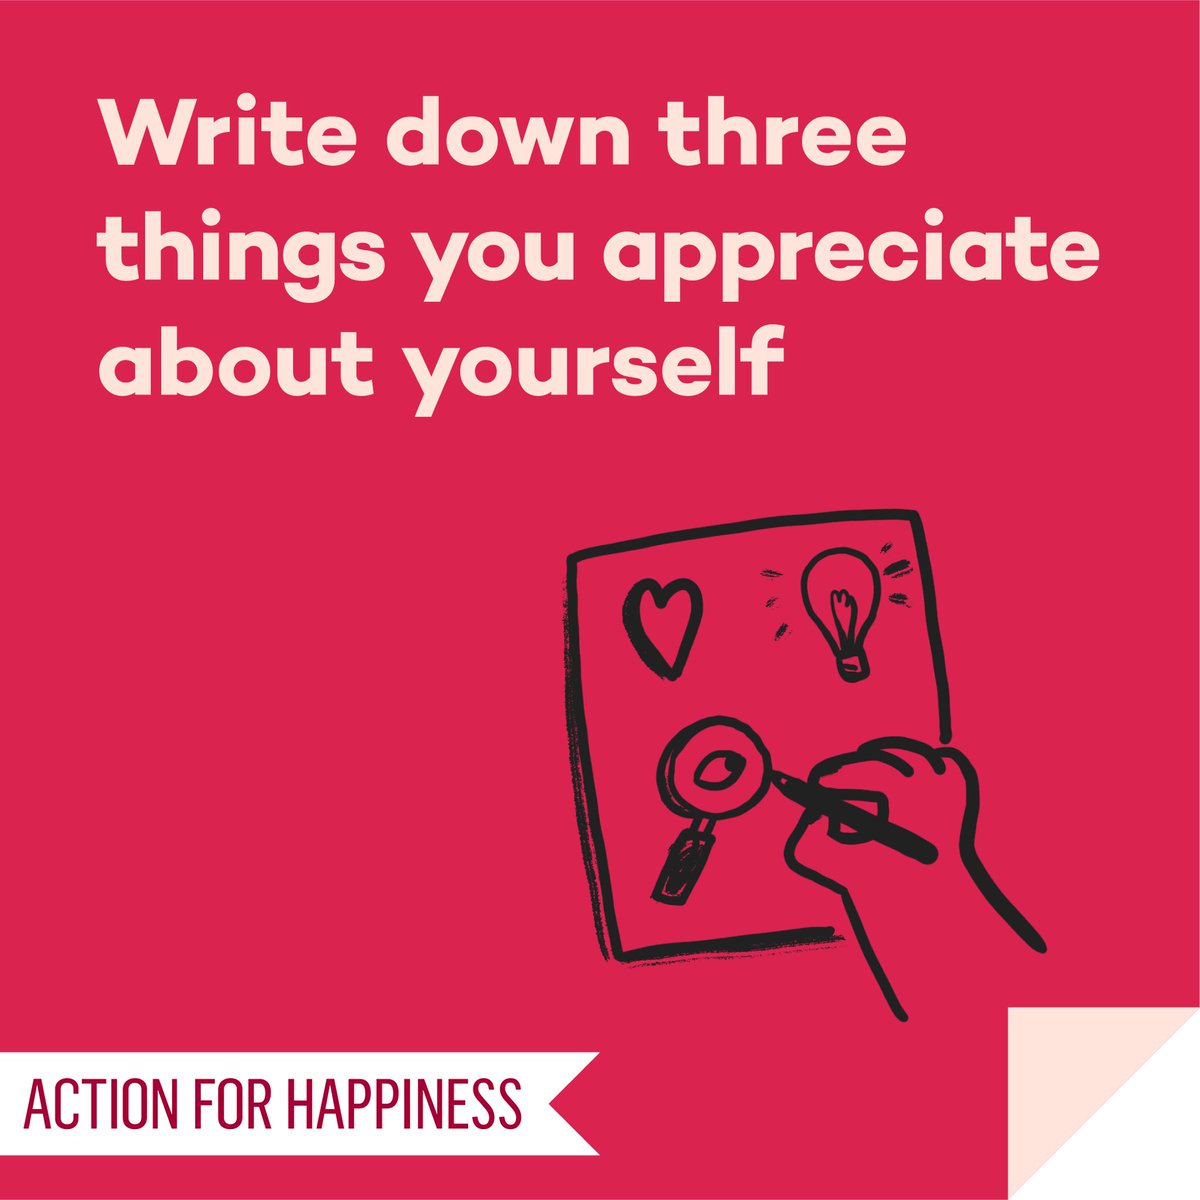 Self Care September - Day 29: Write down three things you appreciate about yourself actionforhappiness.org/self-care-sept… #SelfCareSeptember